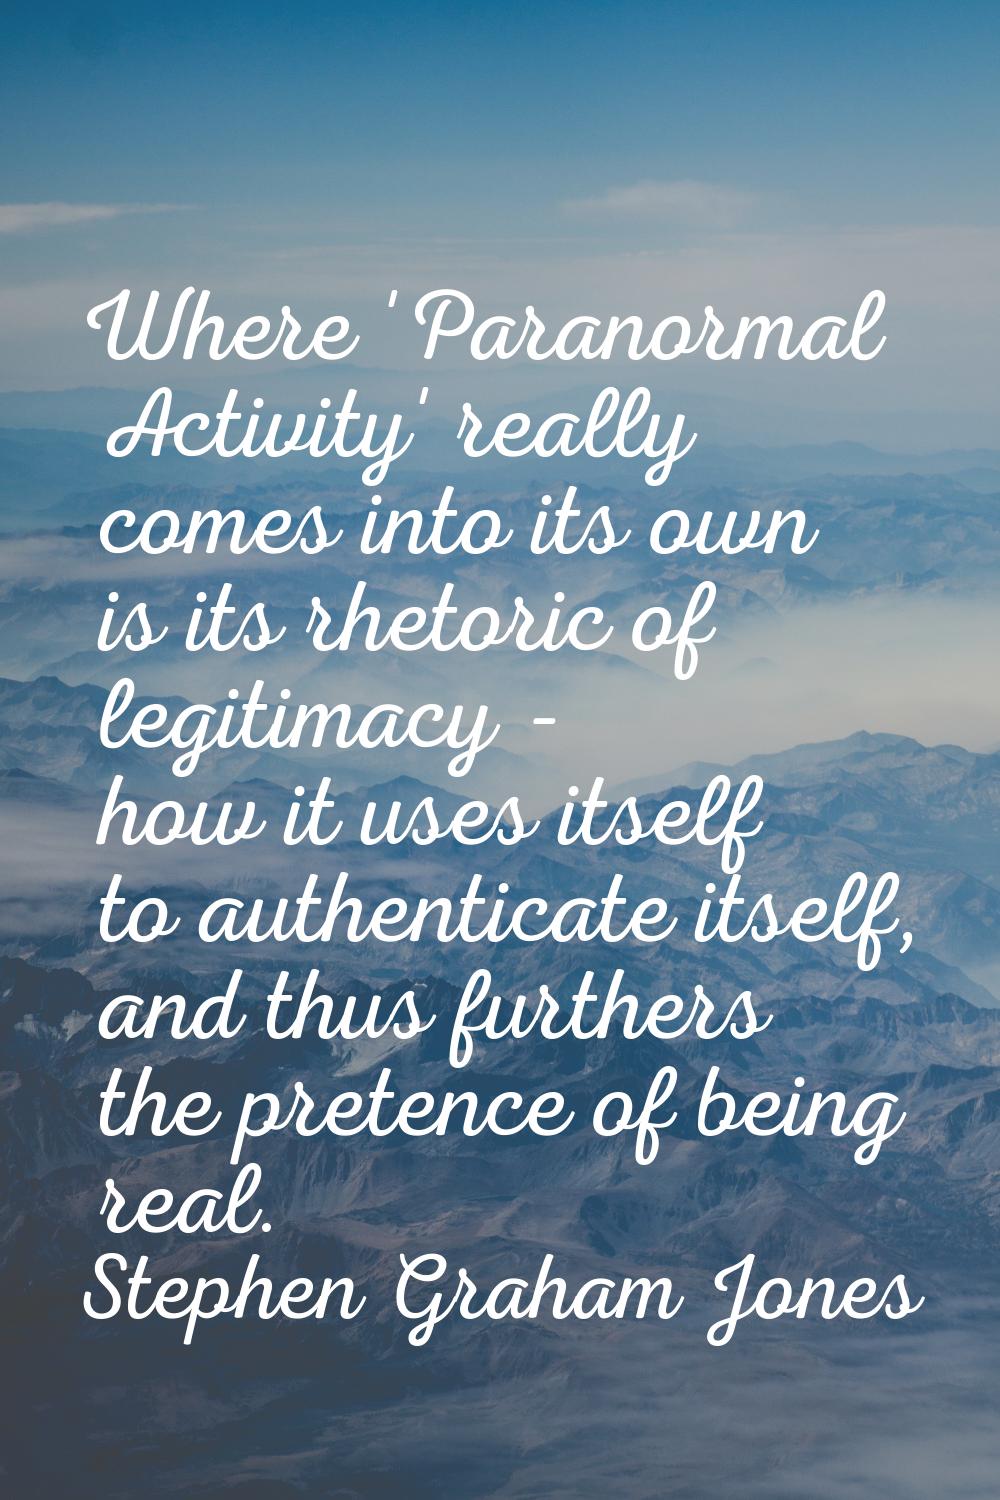 Where 'Paranormal Activity' really comes into its own is its rhetoric of legitimacy - how it uses i